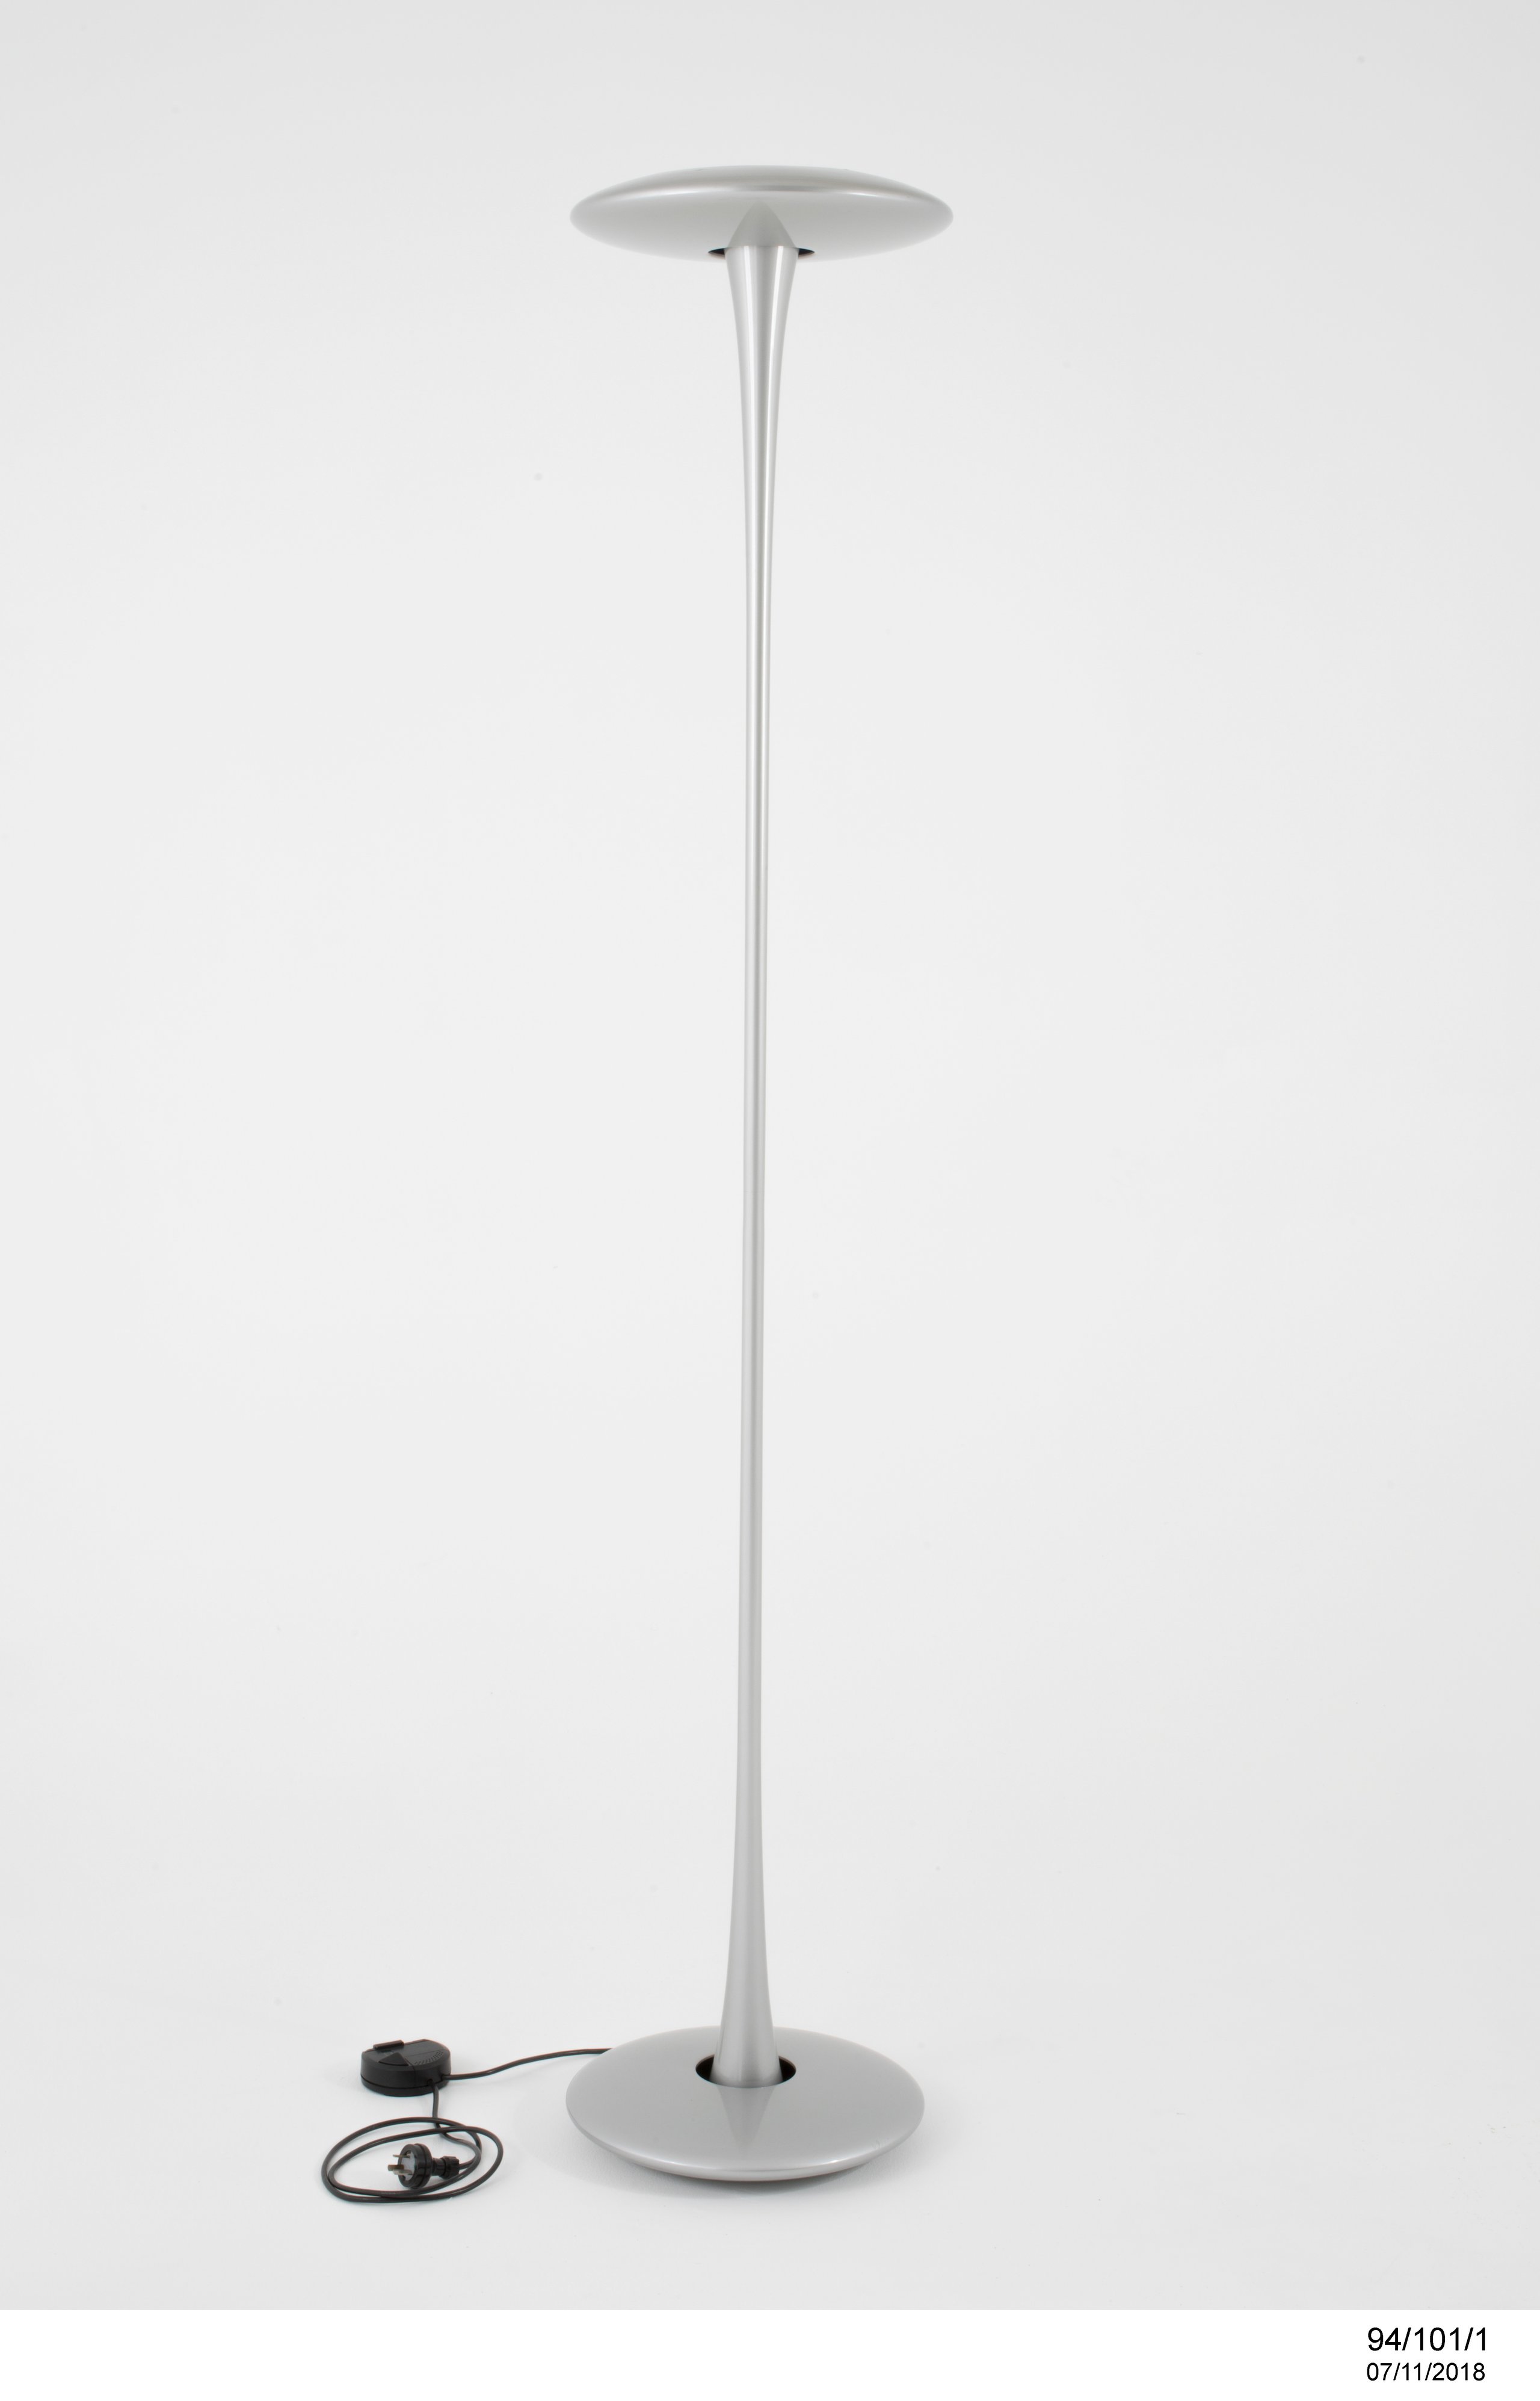 'Helice' floor lamp by Marc Newson